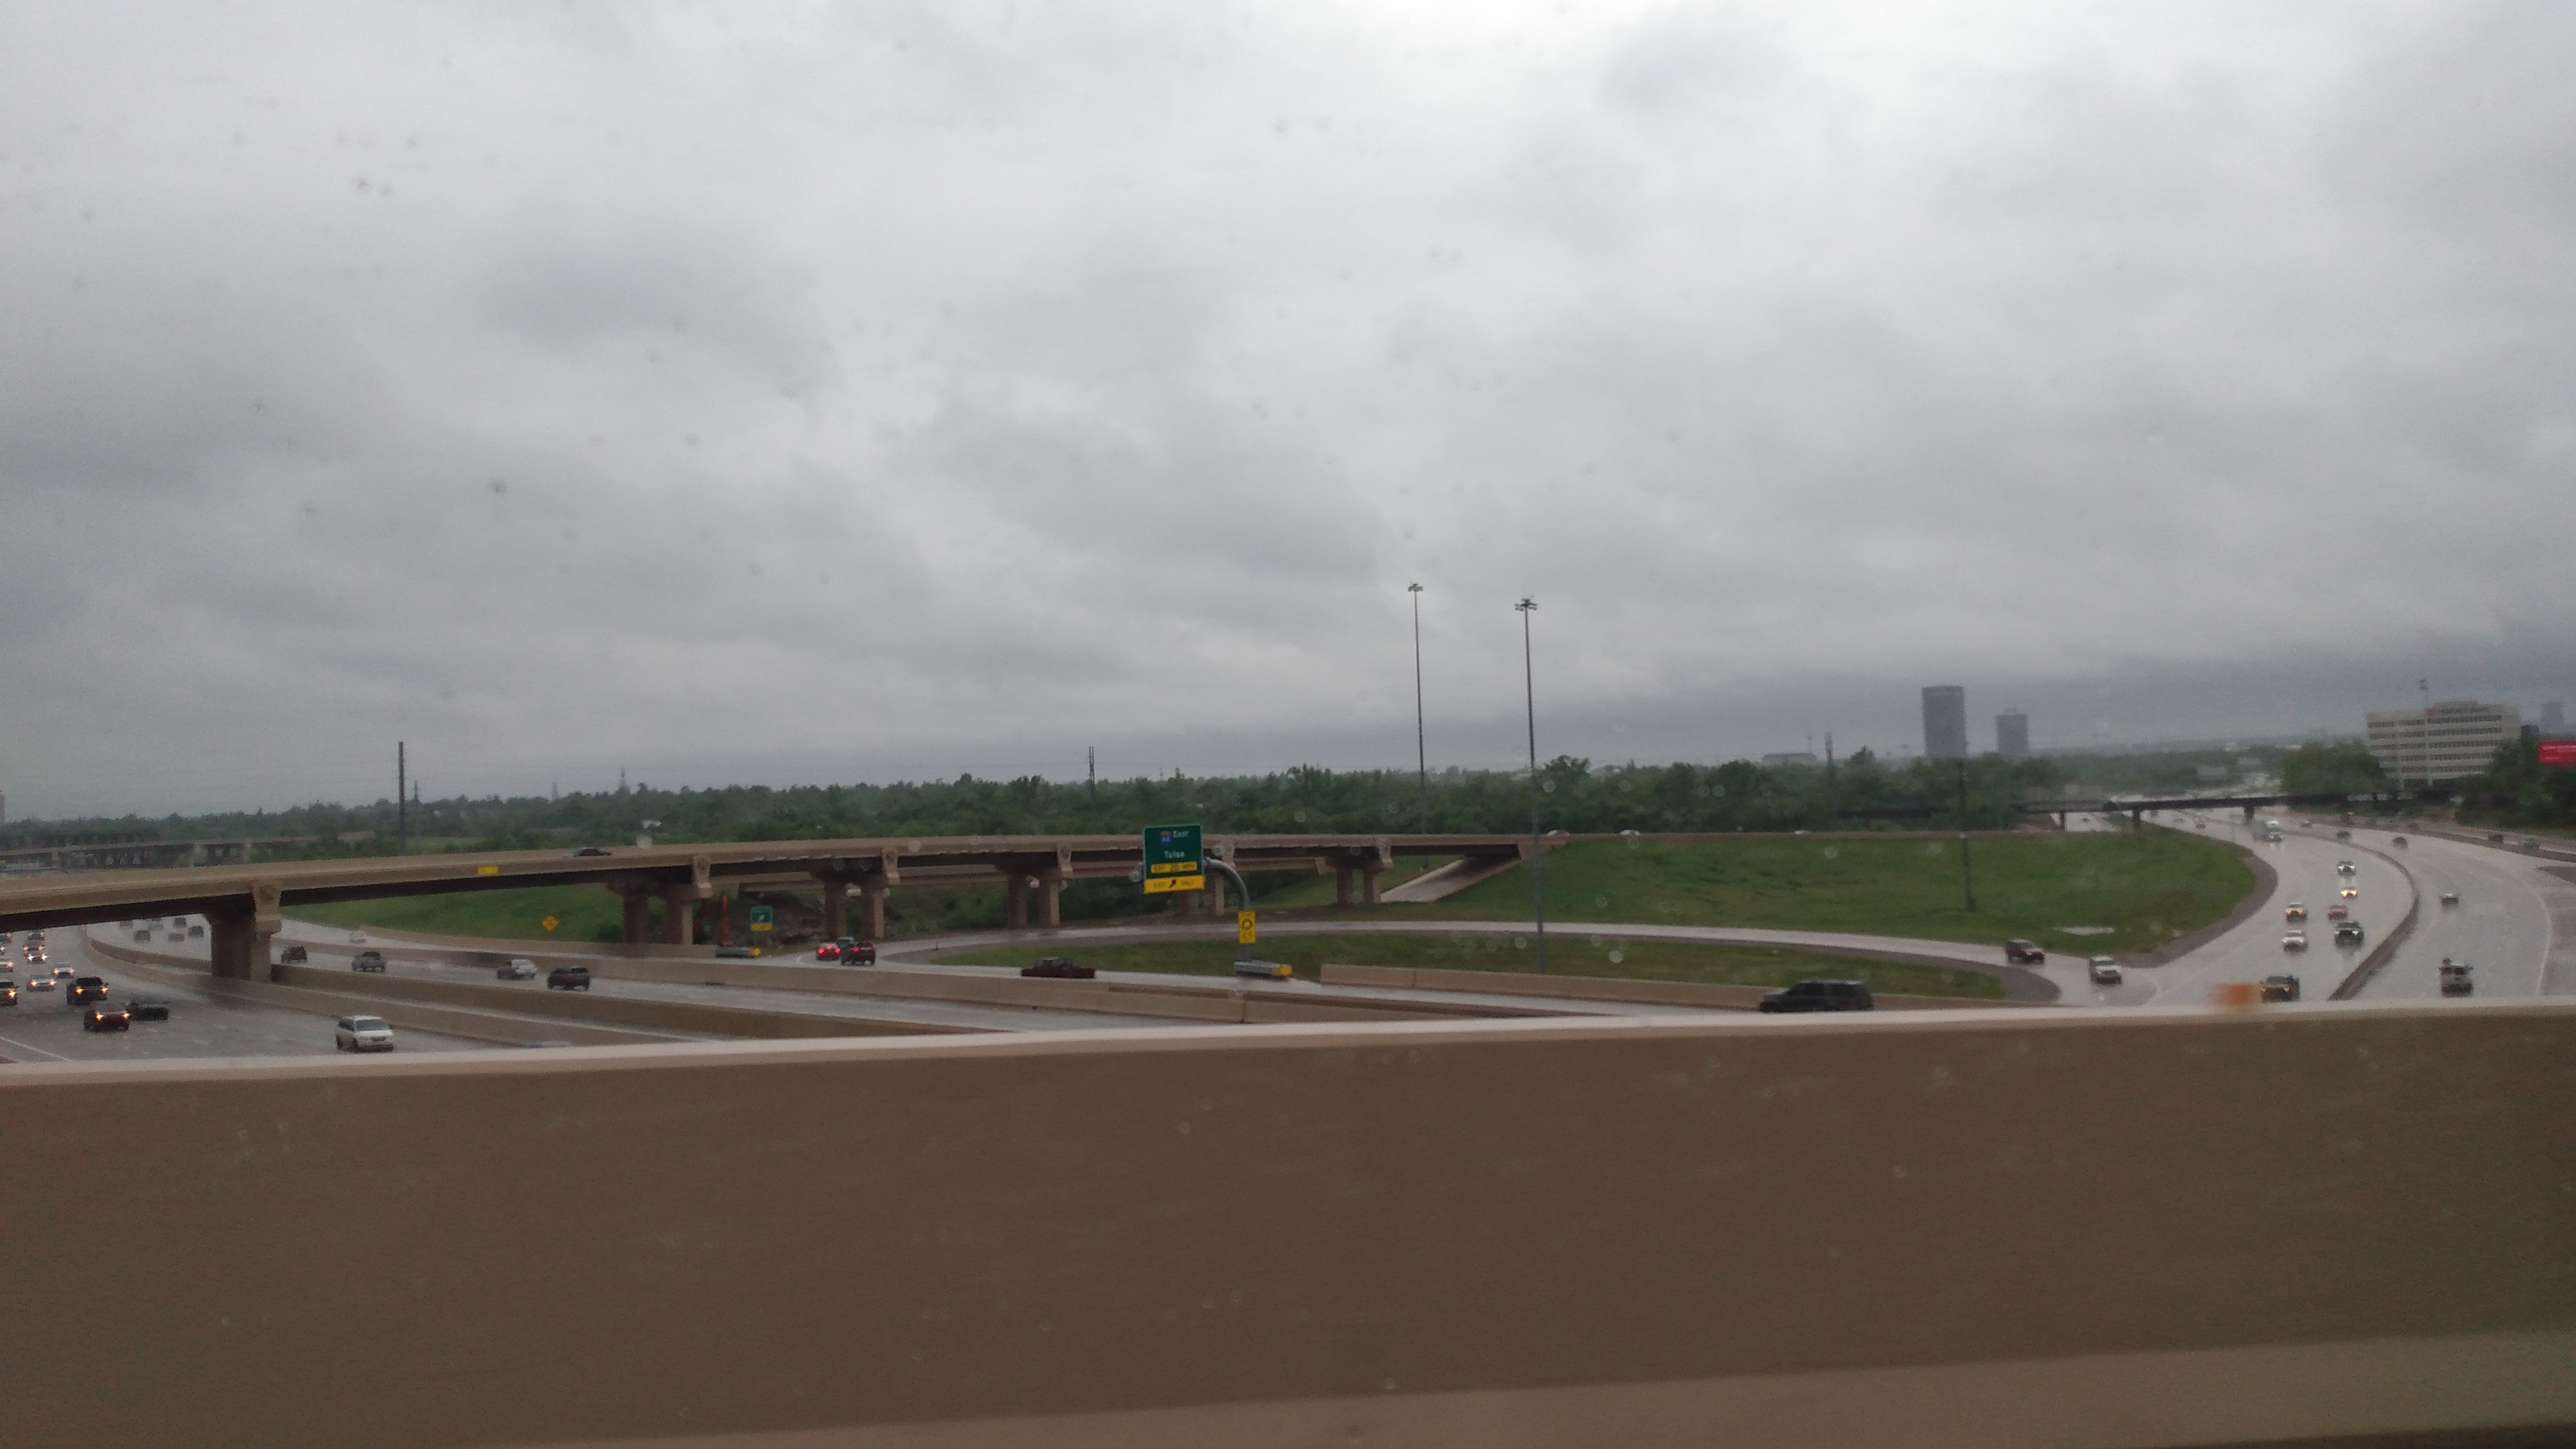 Interstate 235 in Northern Oklahoma City at its northern terminus at the exit 4 interchange with I-44/SH-66 with US 77 (Broadway Extension) continuing northward.